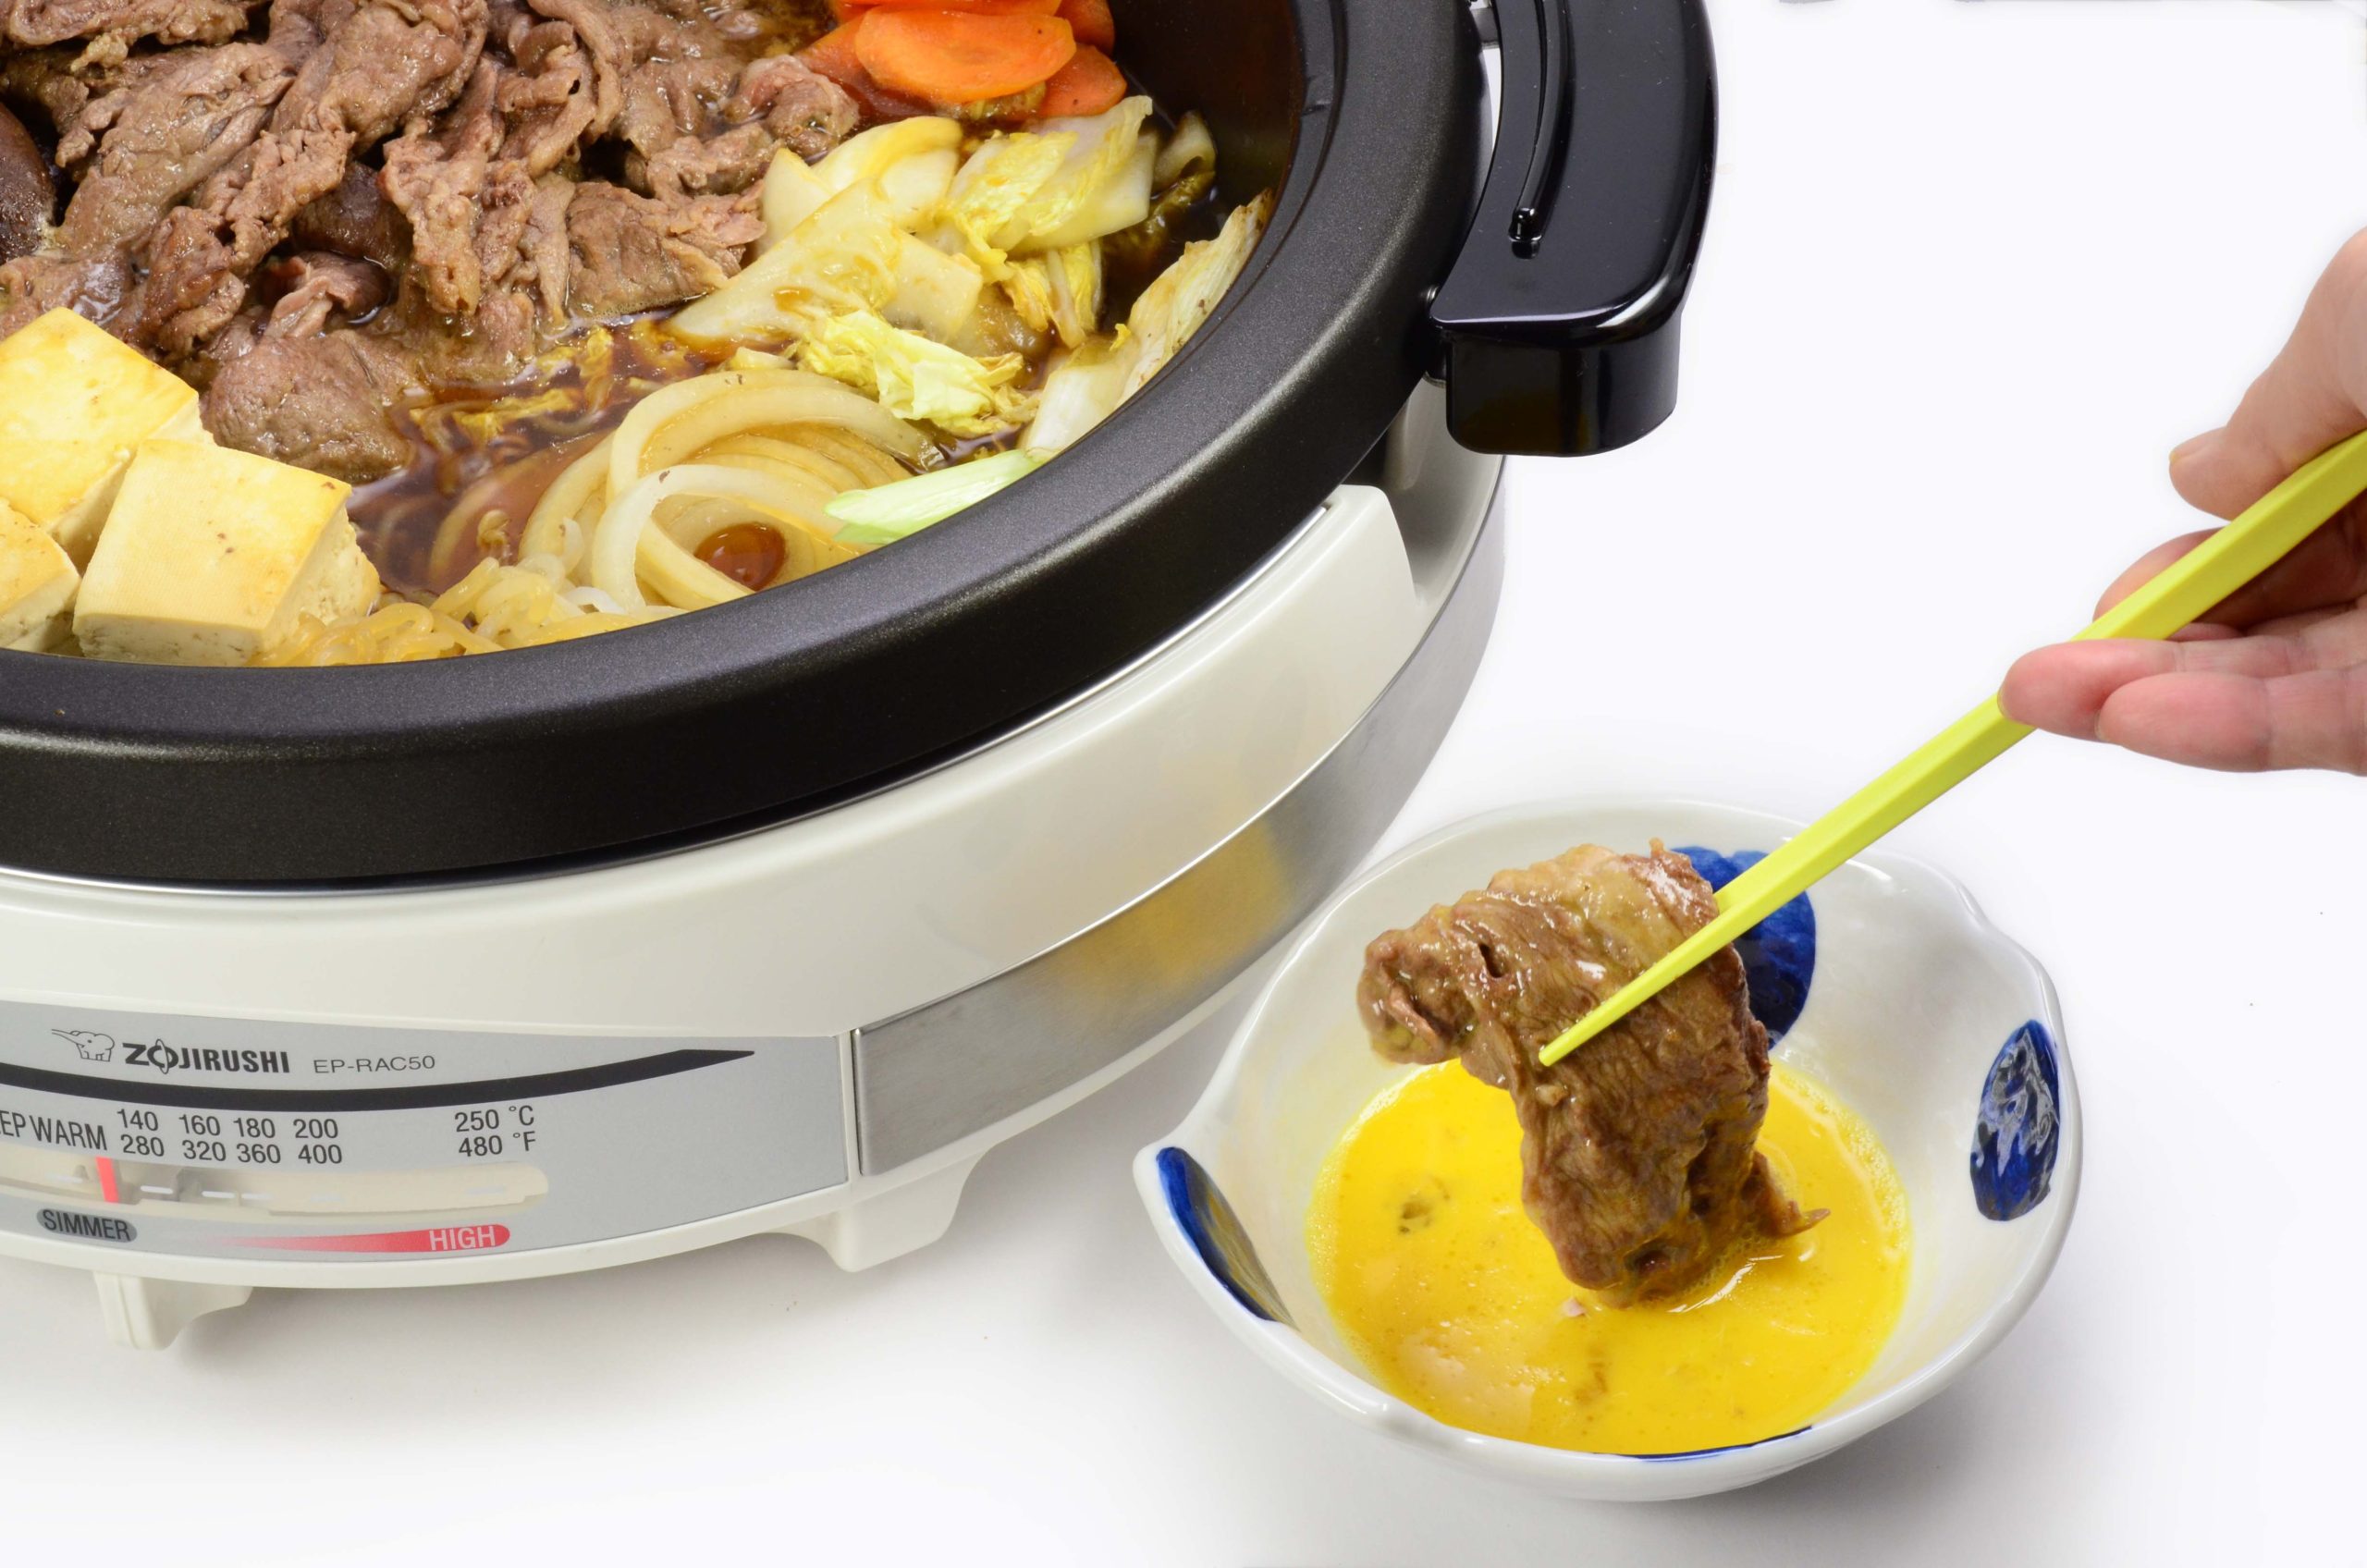 Zojirushi Kitchen Inspirations: Introducing our Newest Rice Cooker